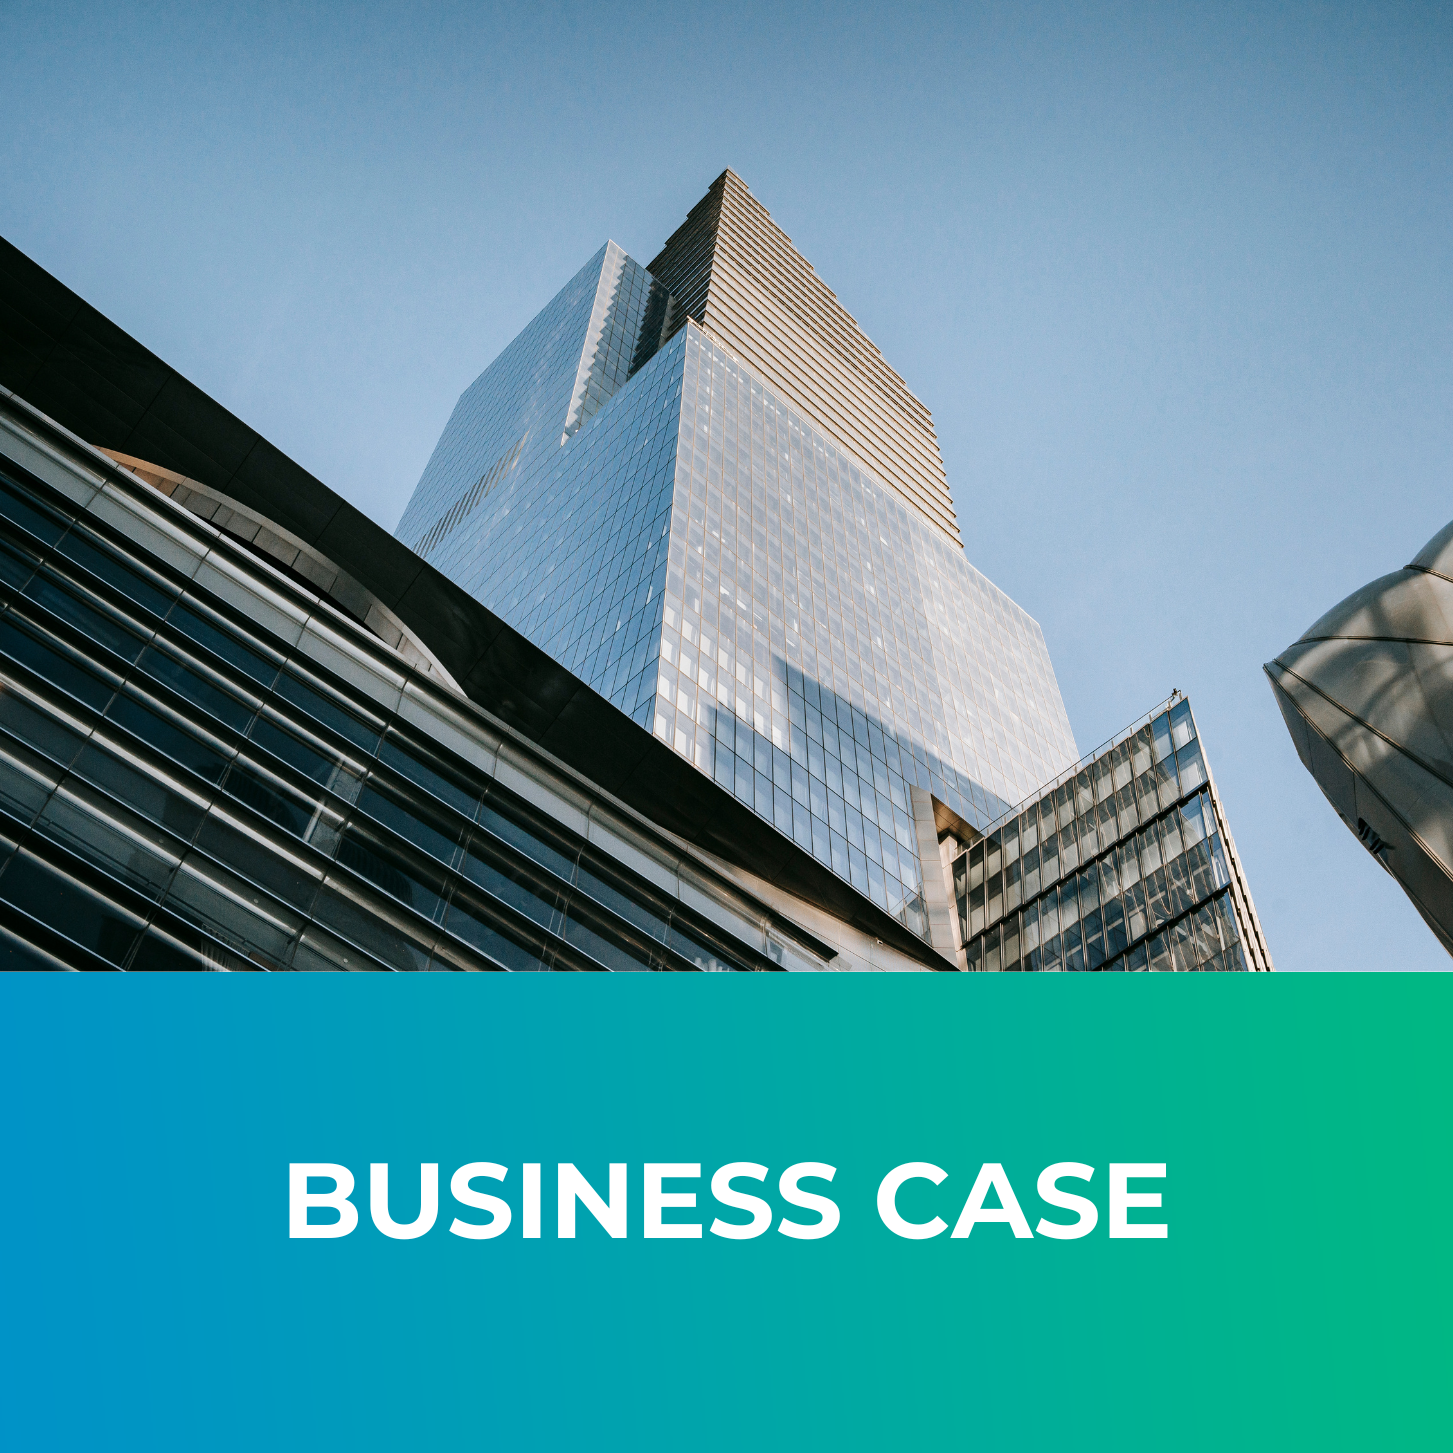  Is your company looking to improve its business decarbonisation strategy and seeking support on how to reach net zero targets? eevie’s Business Case shares valuable content related to Employee Climate Engagement, ESG strategy and corporate sustainab